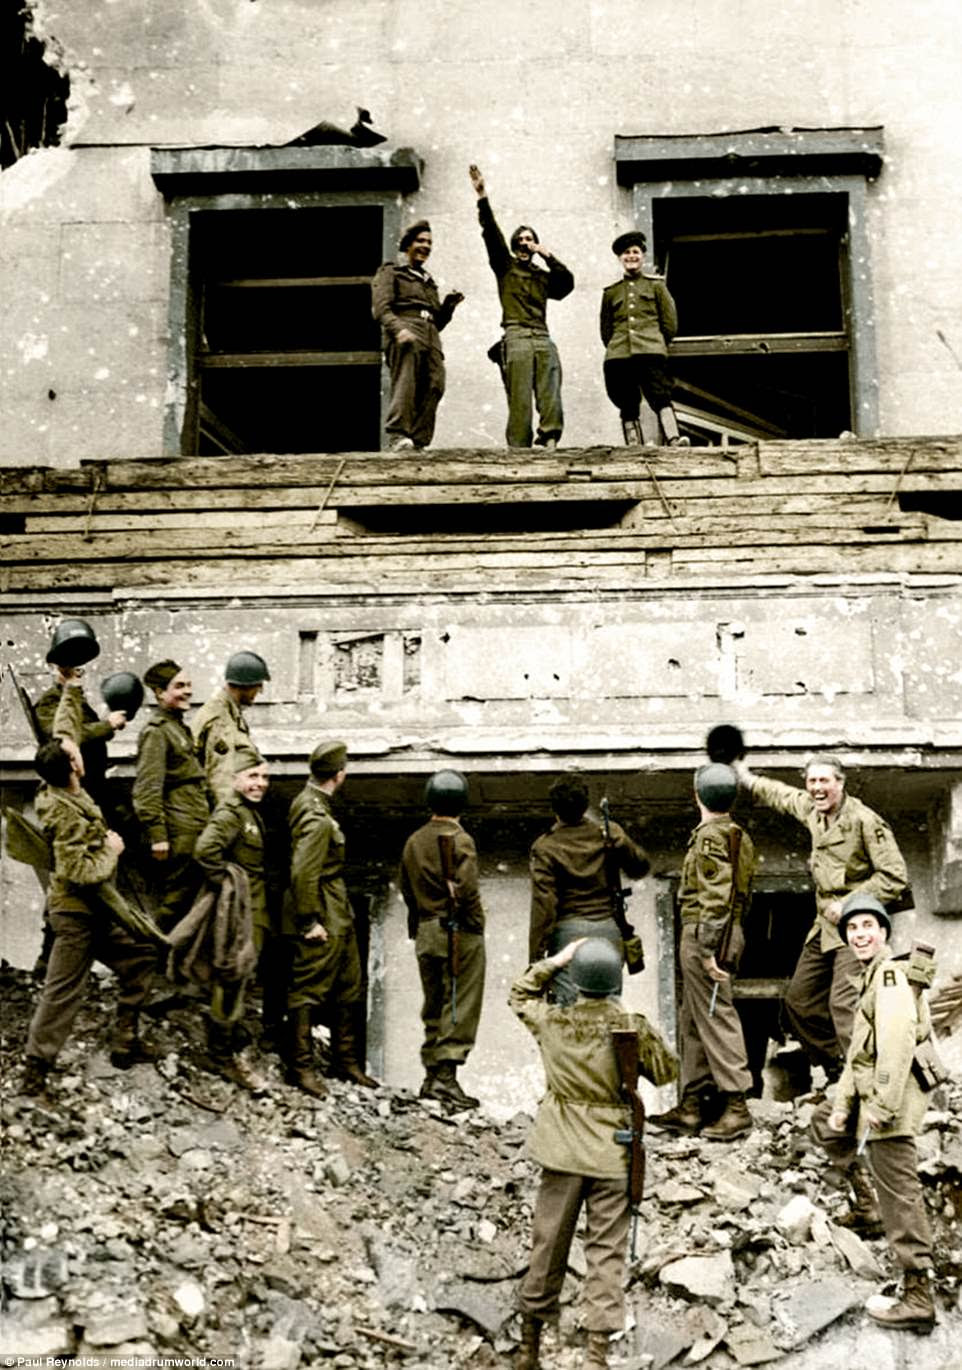 Revenge: The final victory over Nazi Germany achieved, soldiers and allies of the British, American and Russian armies mimic and mock Adolf Hitler and his ideas on the dictator's famous balcony at the Chancellery in conquered Berlin on July 6, 1945